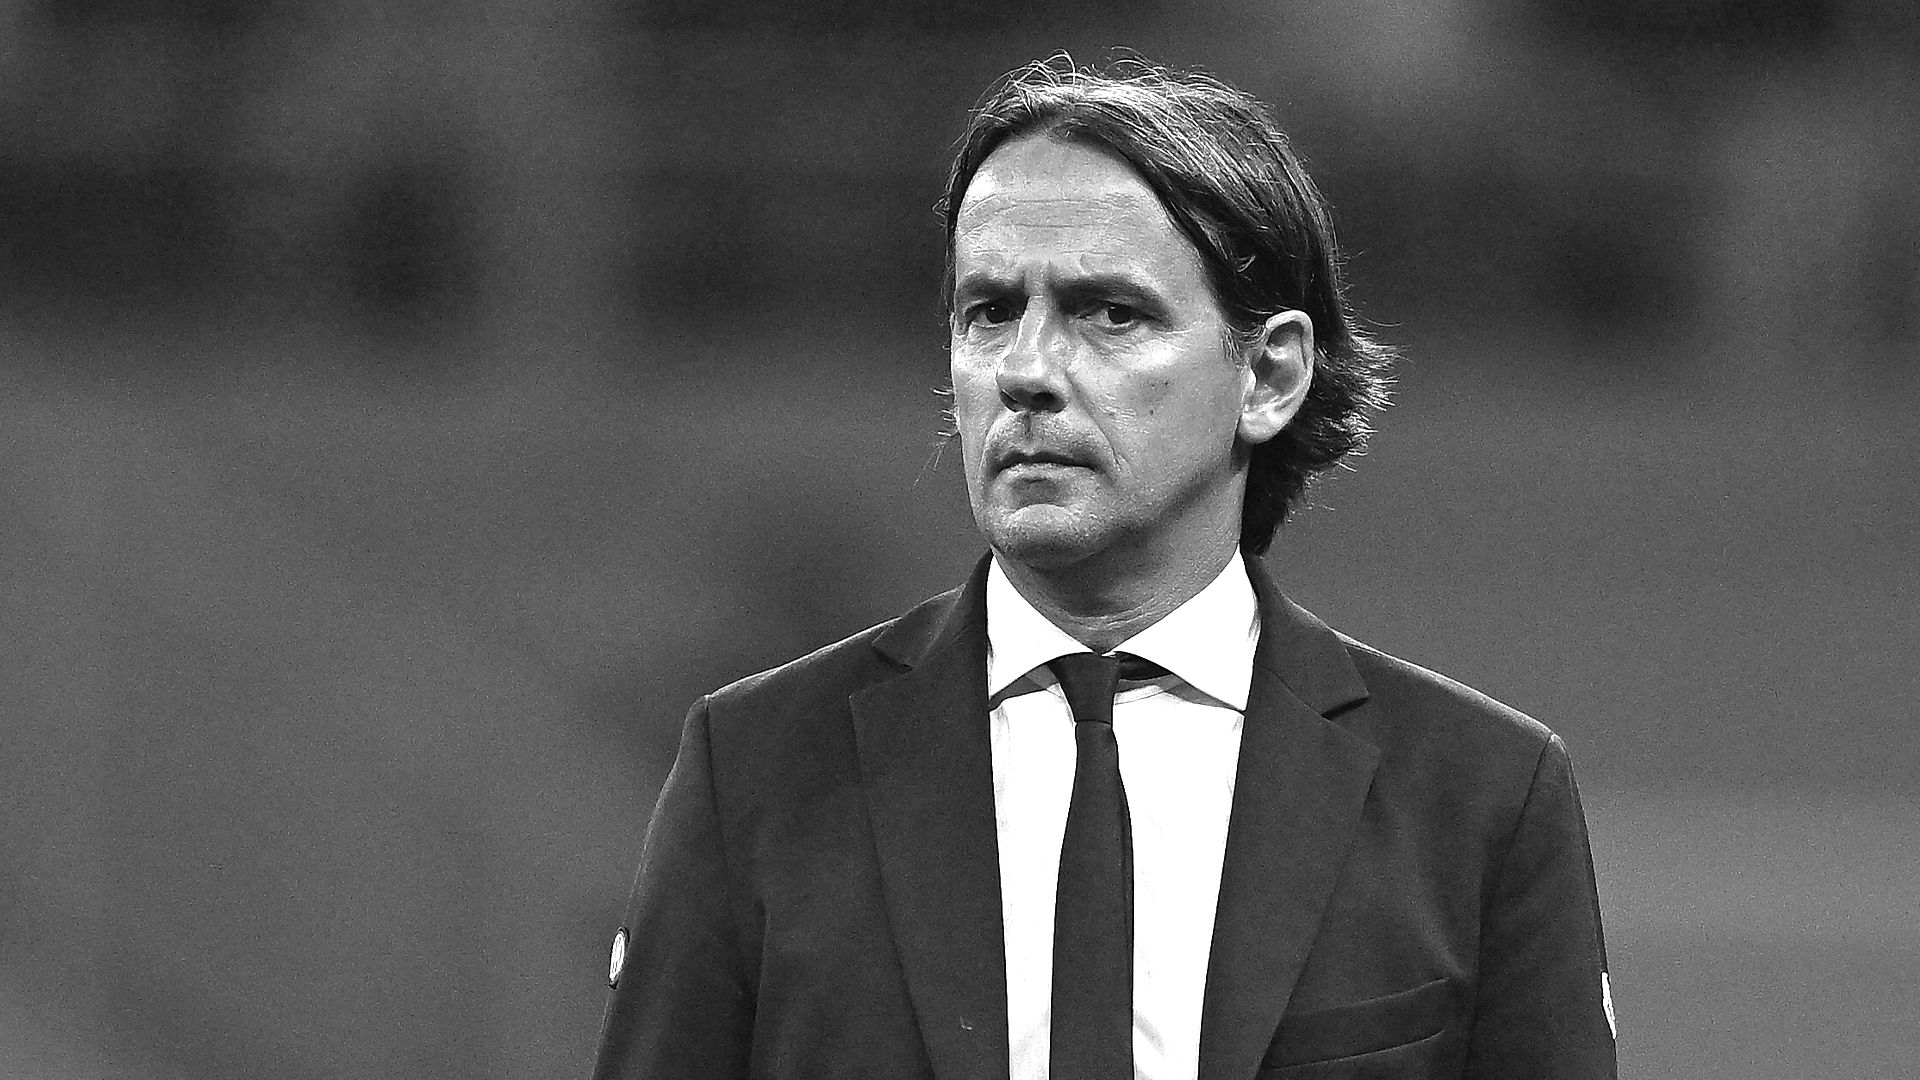 Simone_Inzaghi_stars-on-field_sof_orizzontale_